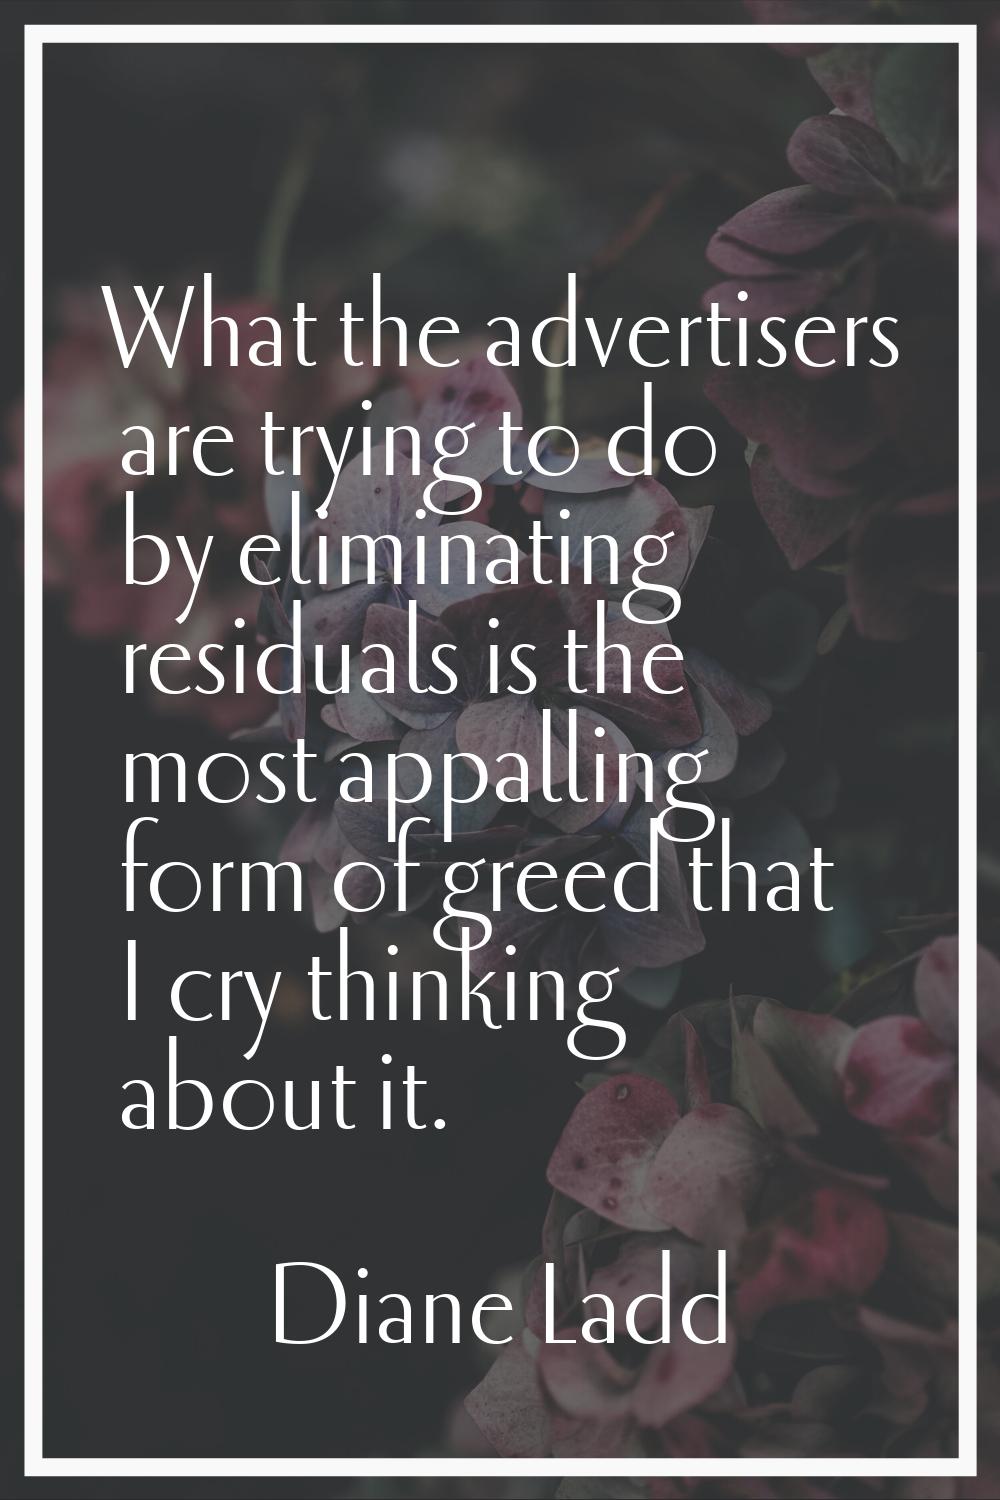 What the advertisers are trying to do by eliminating residuals is the most appalling form of greed 